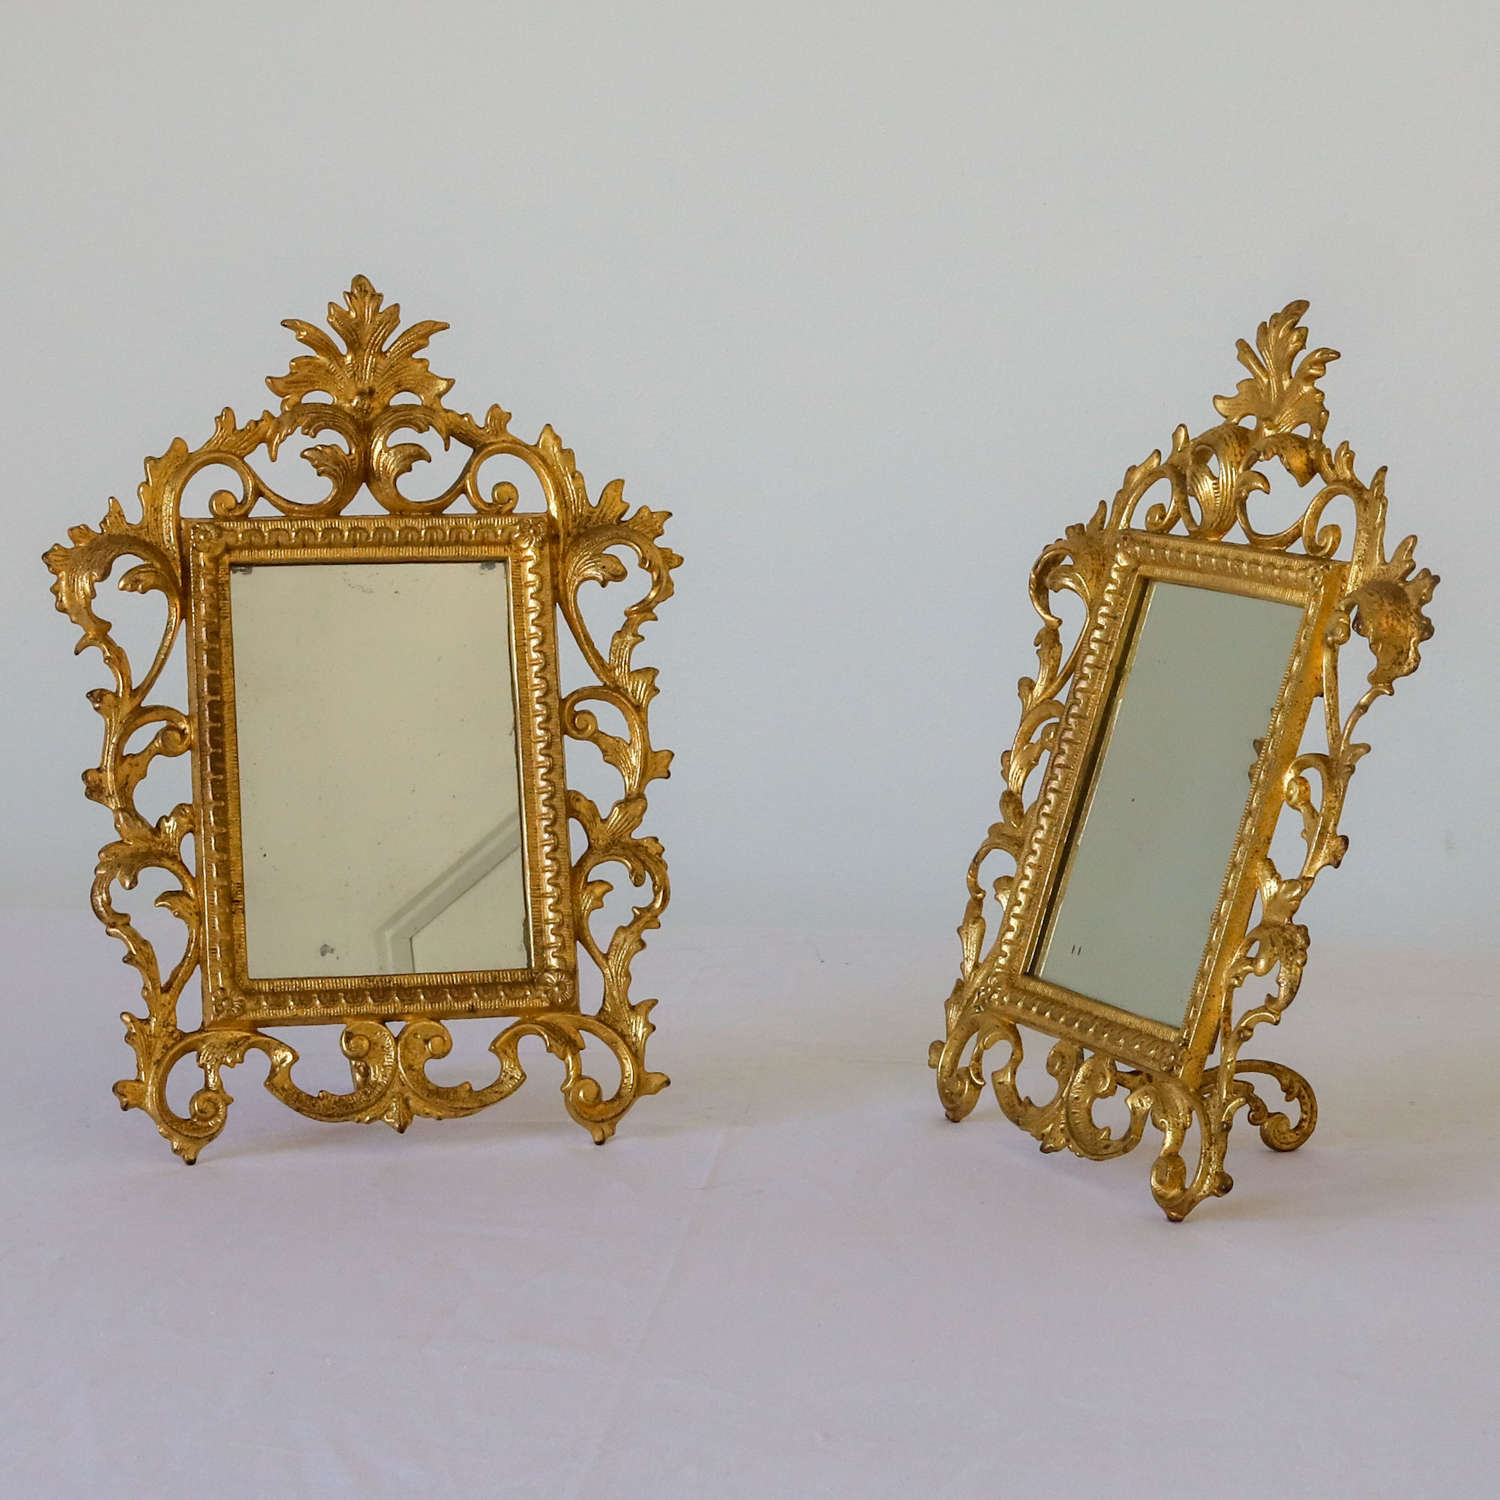 Pair of French circa1880 gilt metal table mirrors